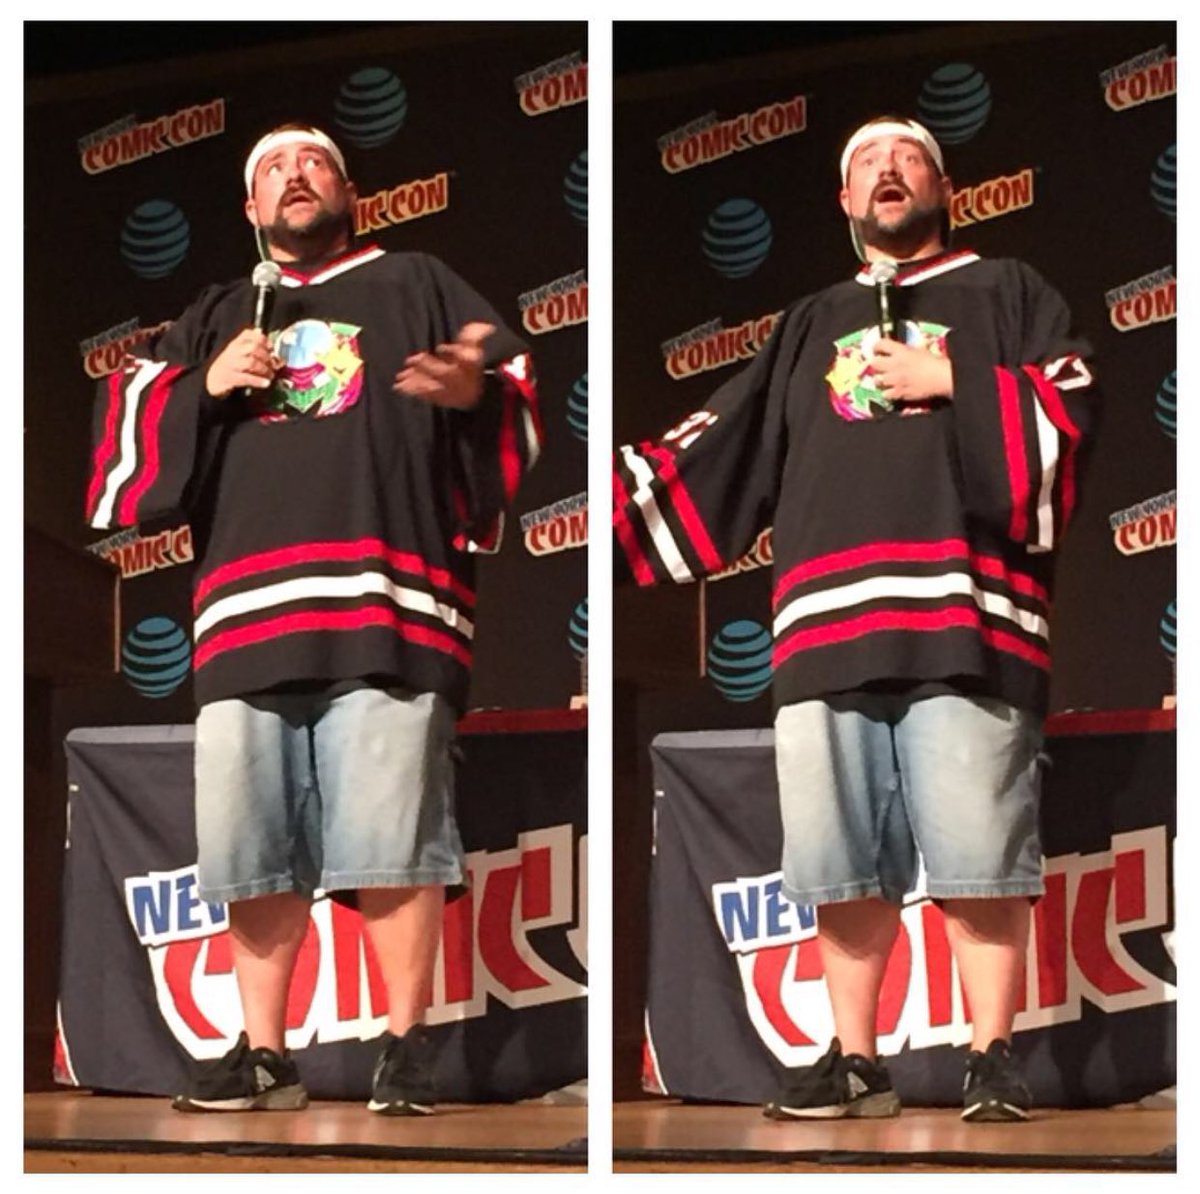 RT @NY_Comic_Con: .@ThatKevinSmith takes the stage and brings the laughs to #NYCC! https://t.co/OSPc8fRiqb